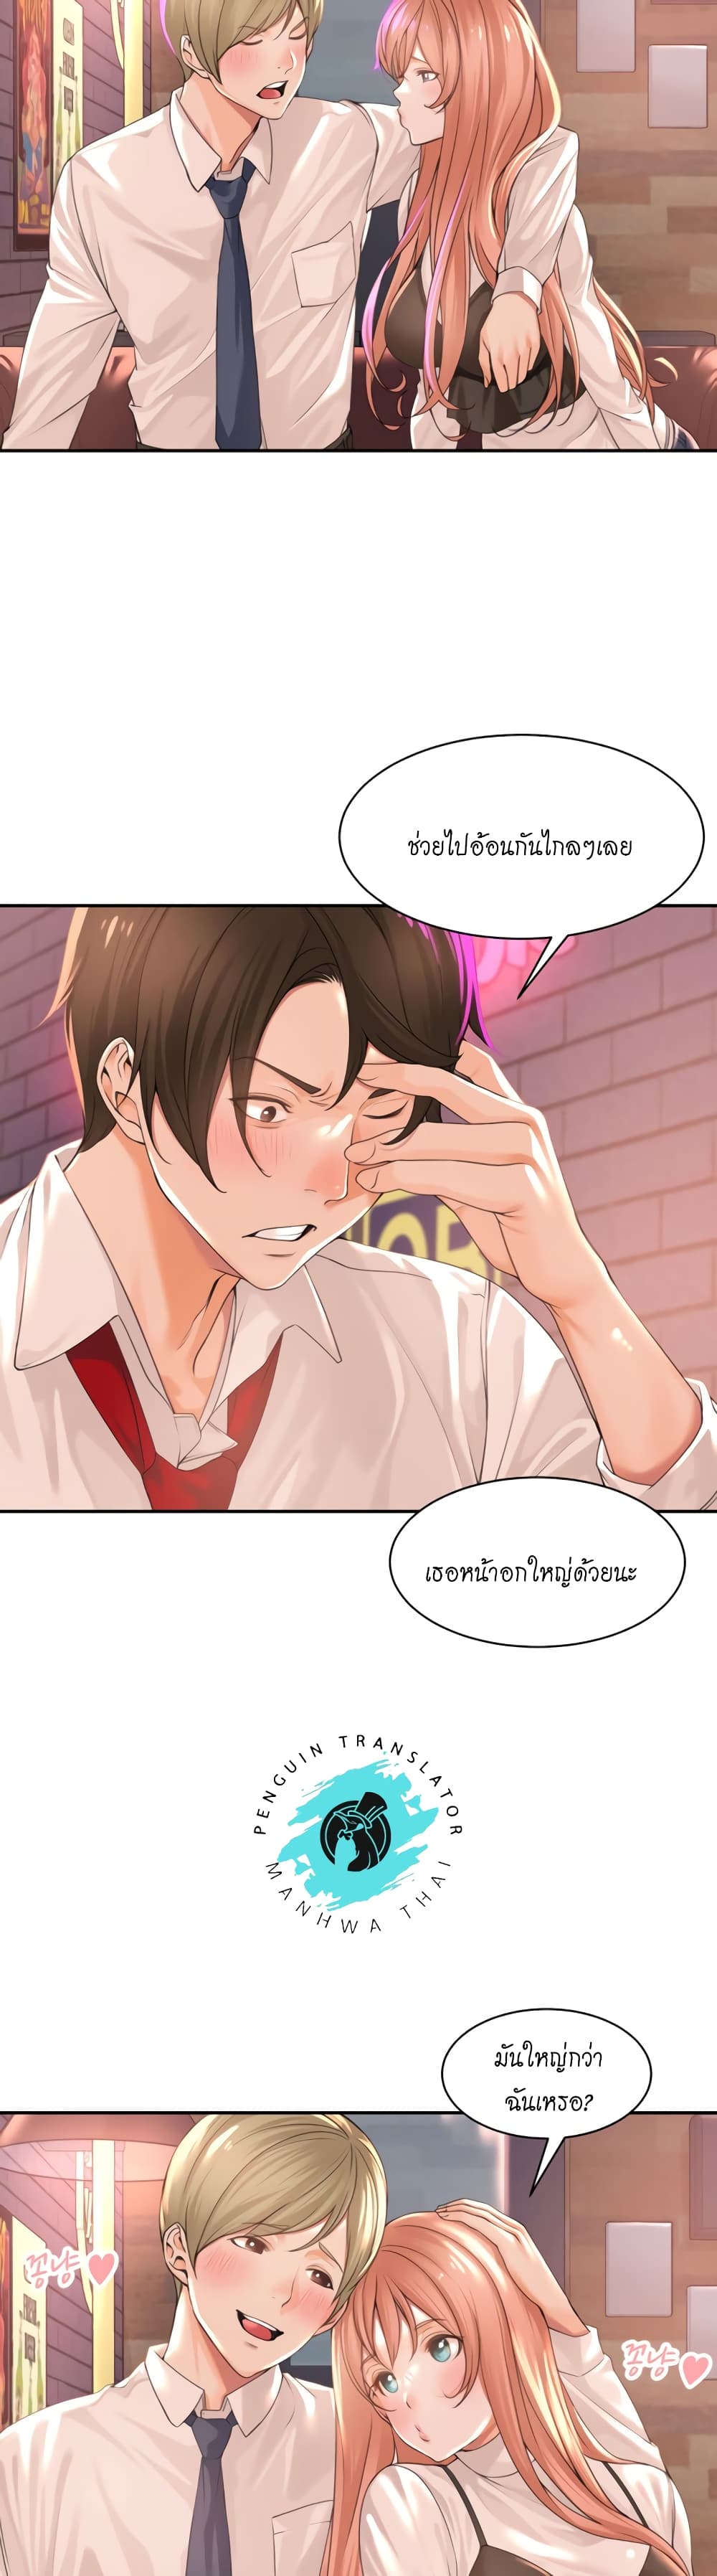 Manager, Please Scold Me ตอนที่ 1 ภาพ 24